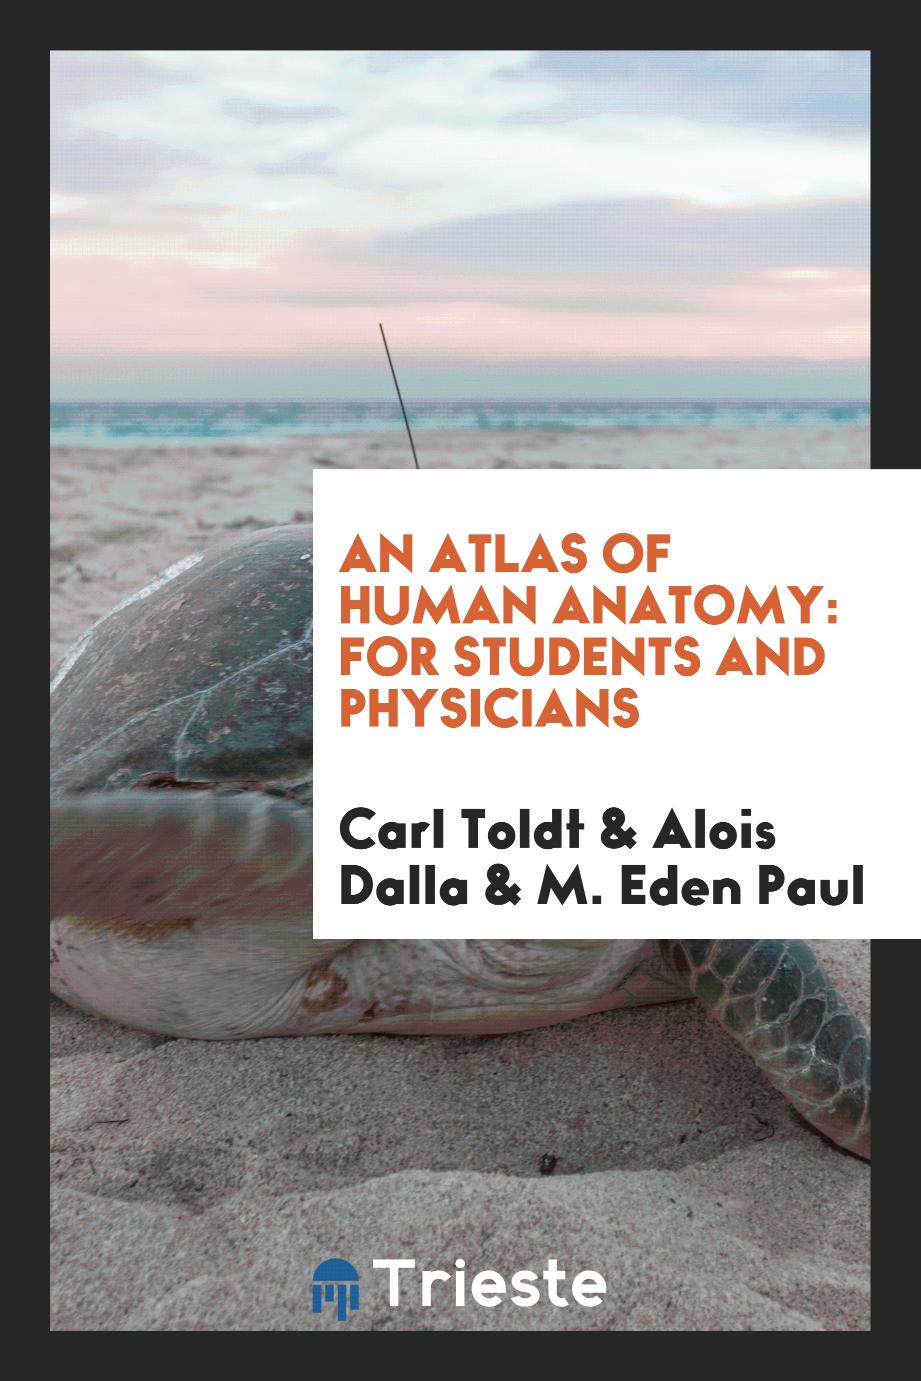 An Atlas of Human Anatomy: For Students and Physicians